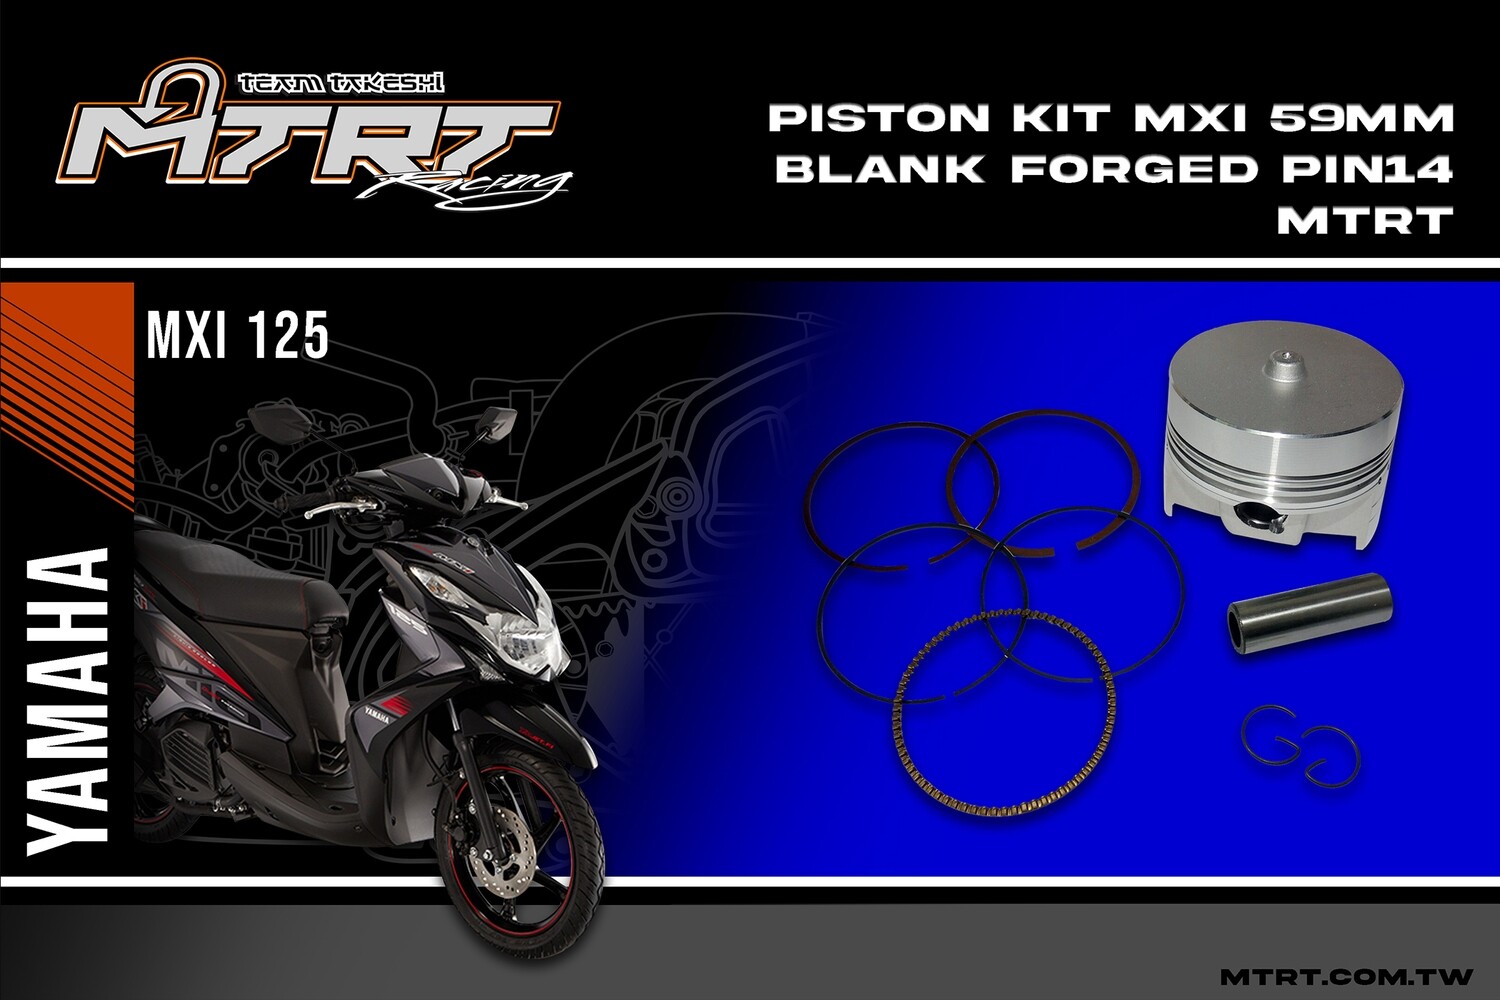 PISTON KIT 59MM BLANK FORGED Pin14 MTRT